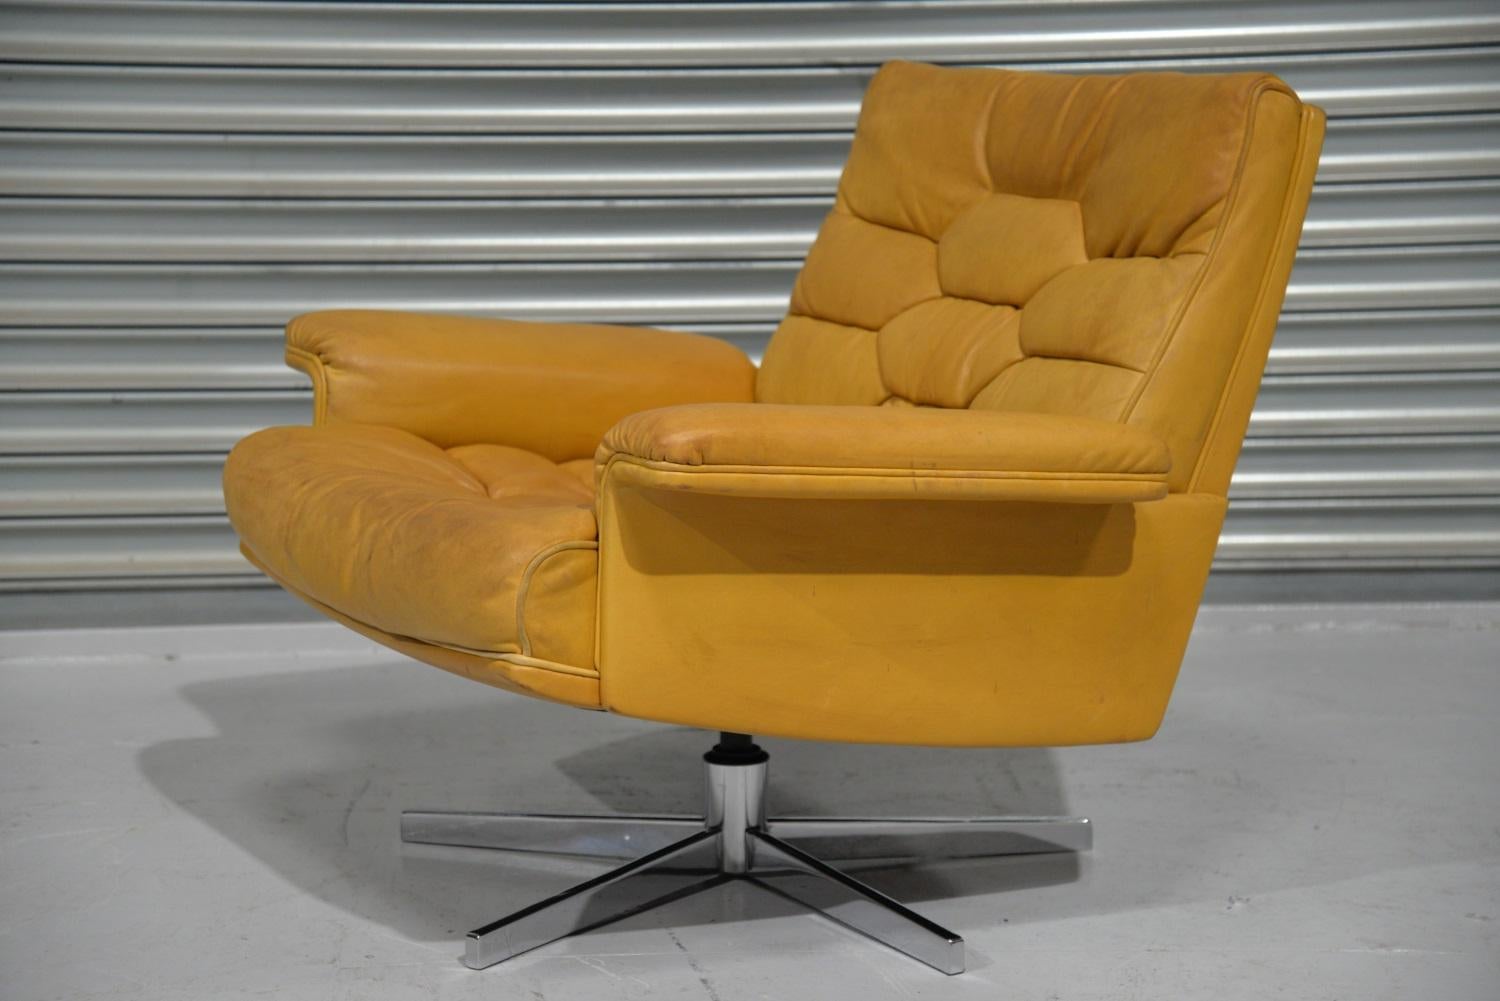 We are delighted to bring to you an ultra-rare and highly desirable De Sede Executive swivel lounge armchair. Built in the 1970s by De Sede craftsman in Switzerland, extremely comfortable with their honeycomb seating design. Upholstered in stunning